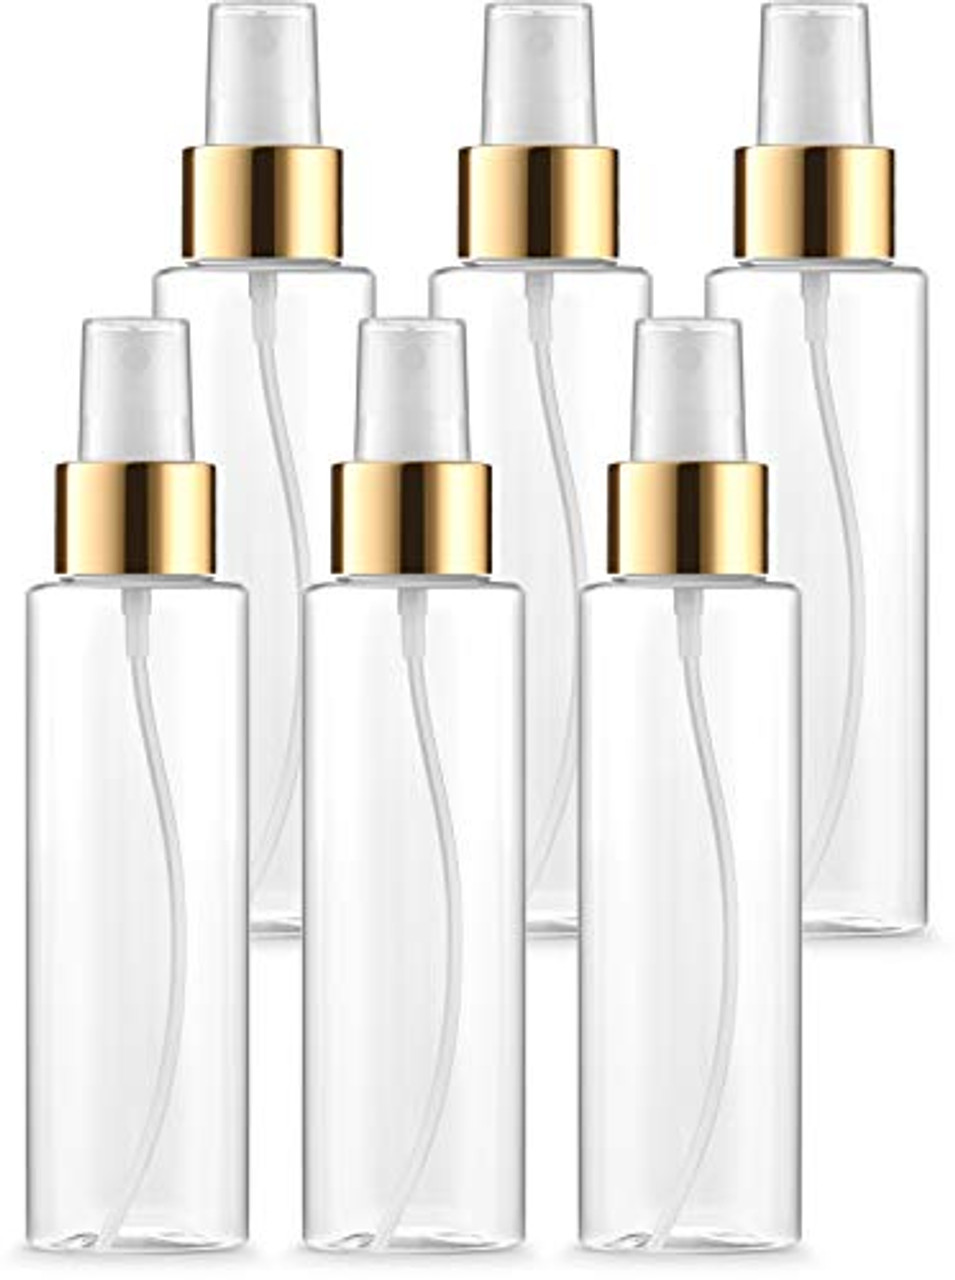 BAR5F Fine Misting Spray Bottles with Gold Trim, Dust Caps, 4 oz, Plastic,  Clear, Refillable, BPA Free Atomizers, Fine Mist Spraying for DIY Beauty  Products, Facial Sprays, Aromatherapy